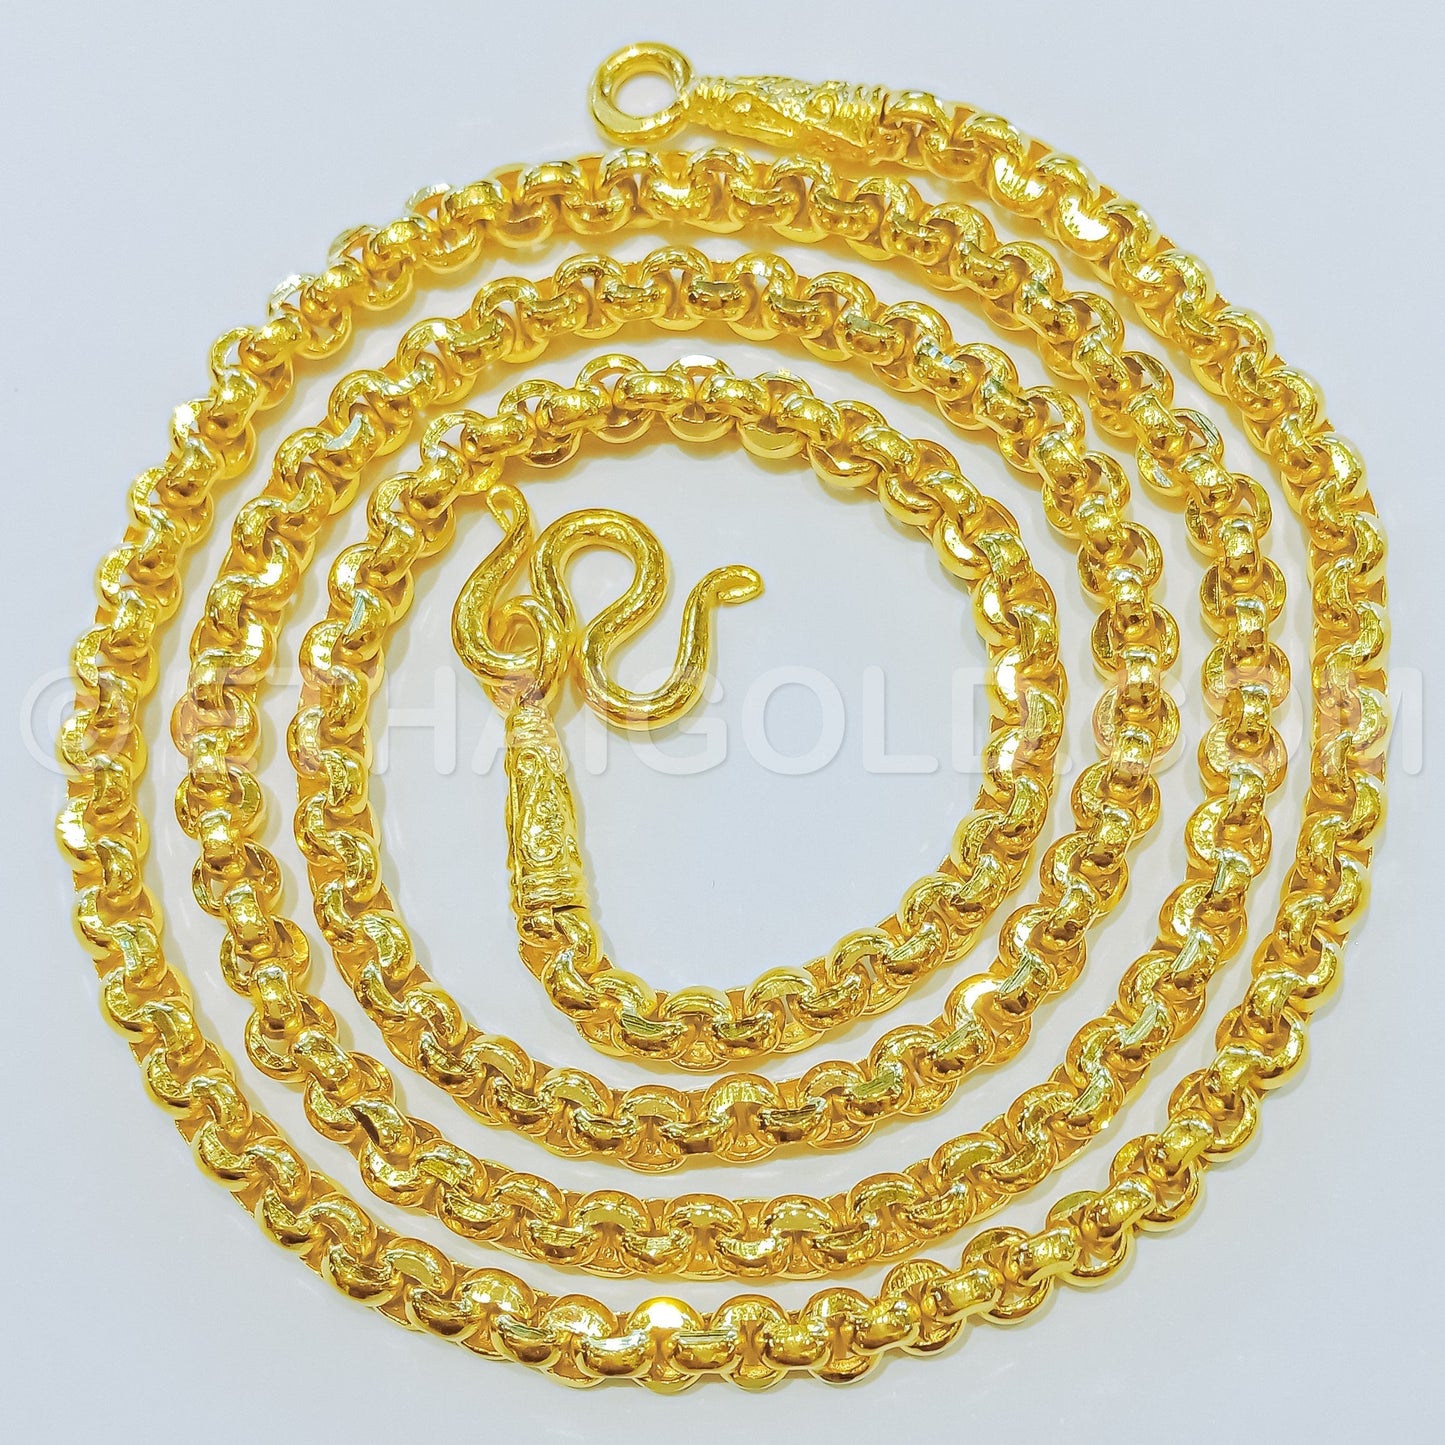 3 BAHT POLISHED DIAMOND-CUT SOLID ROLO CHAIN NECKLACE IN 23K GOLD (ID: N2503B)